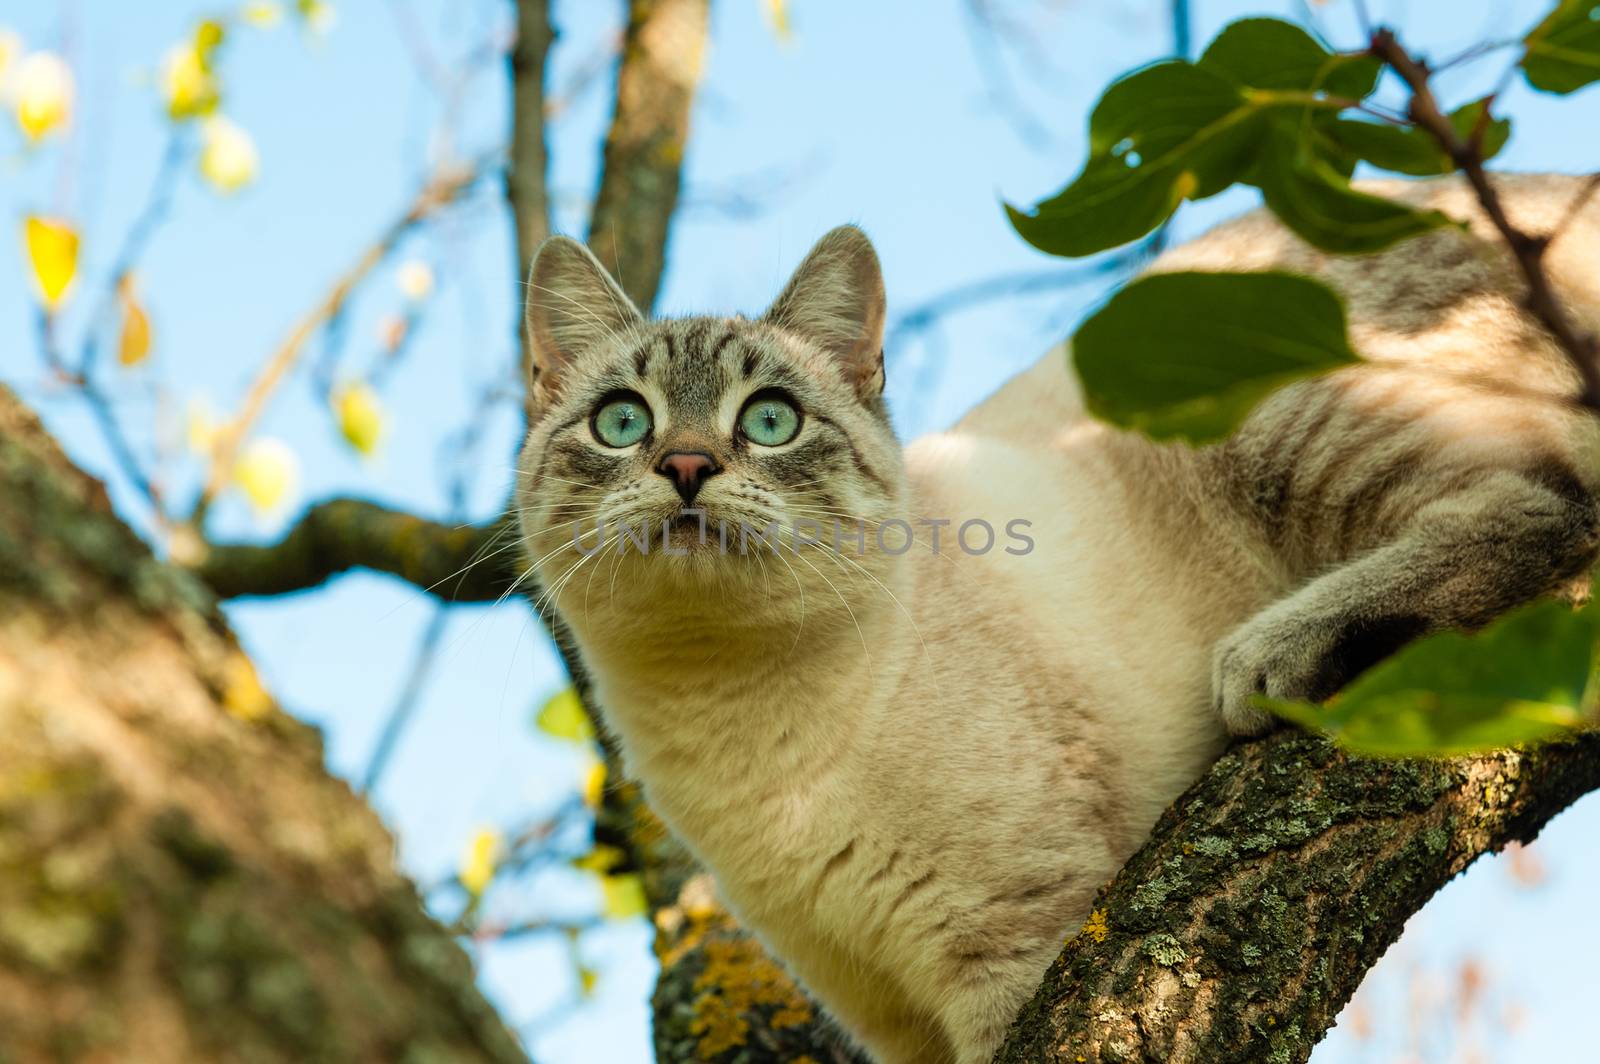 A cat with large, surprised, round eyes, without blinking, looks at a small bird sitting on a nearby branch